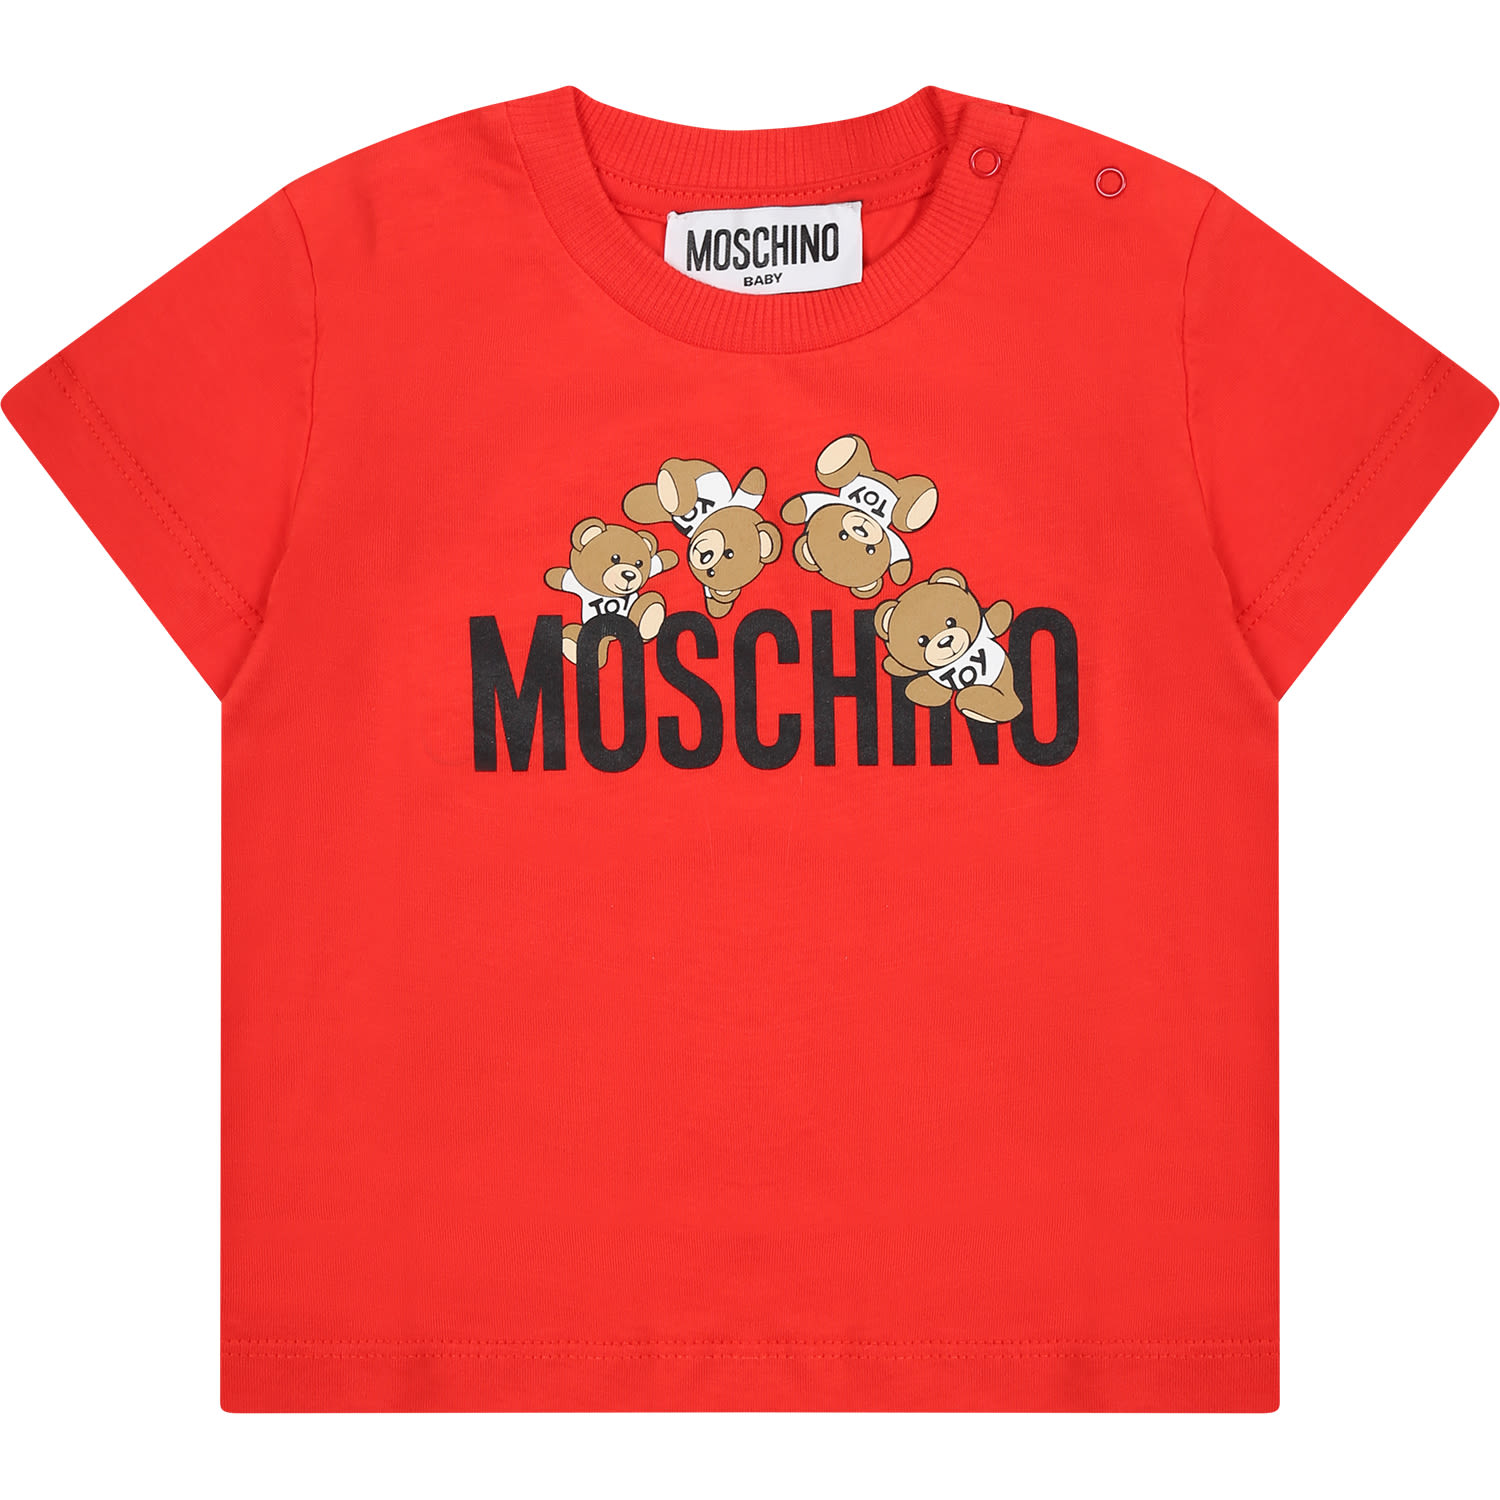 Moschino Red T-shirt For Baby Boy With Teddy Bears